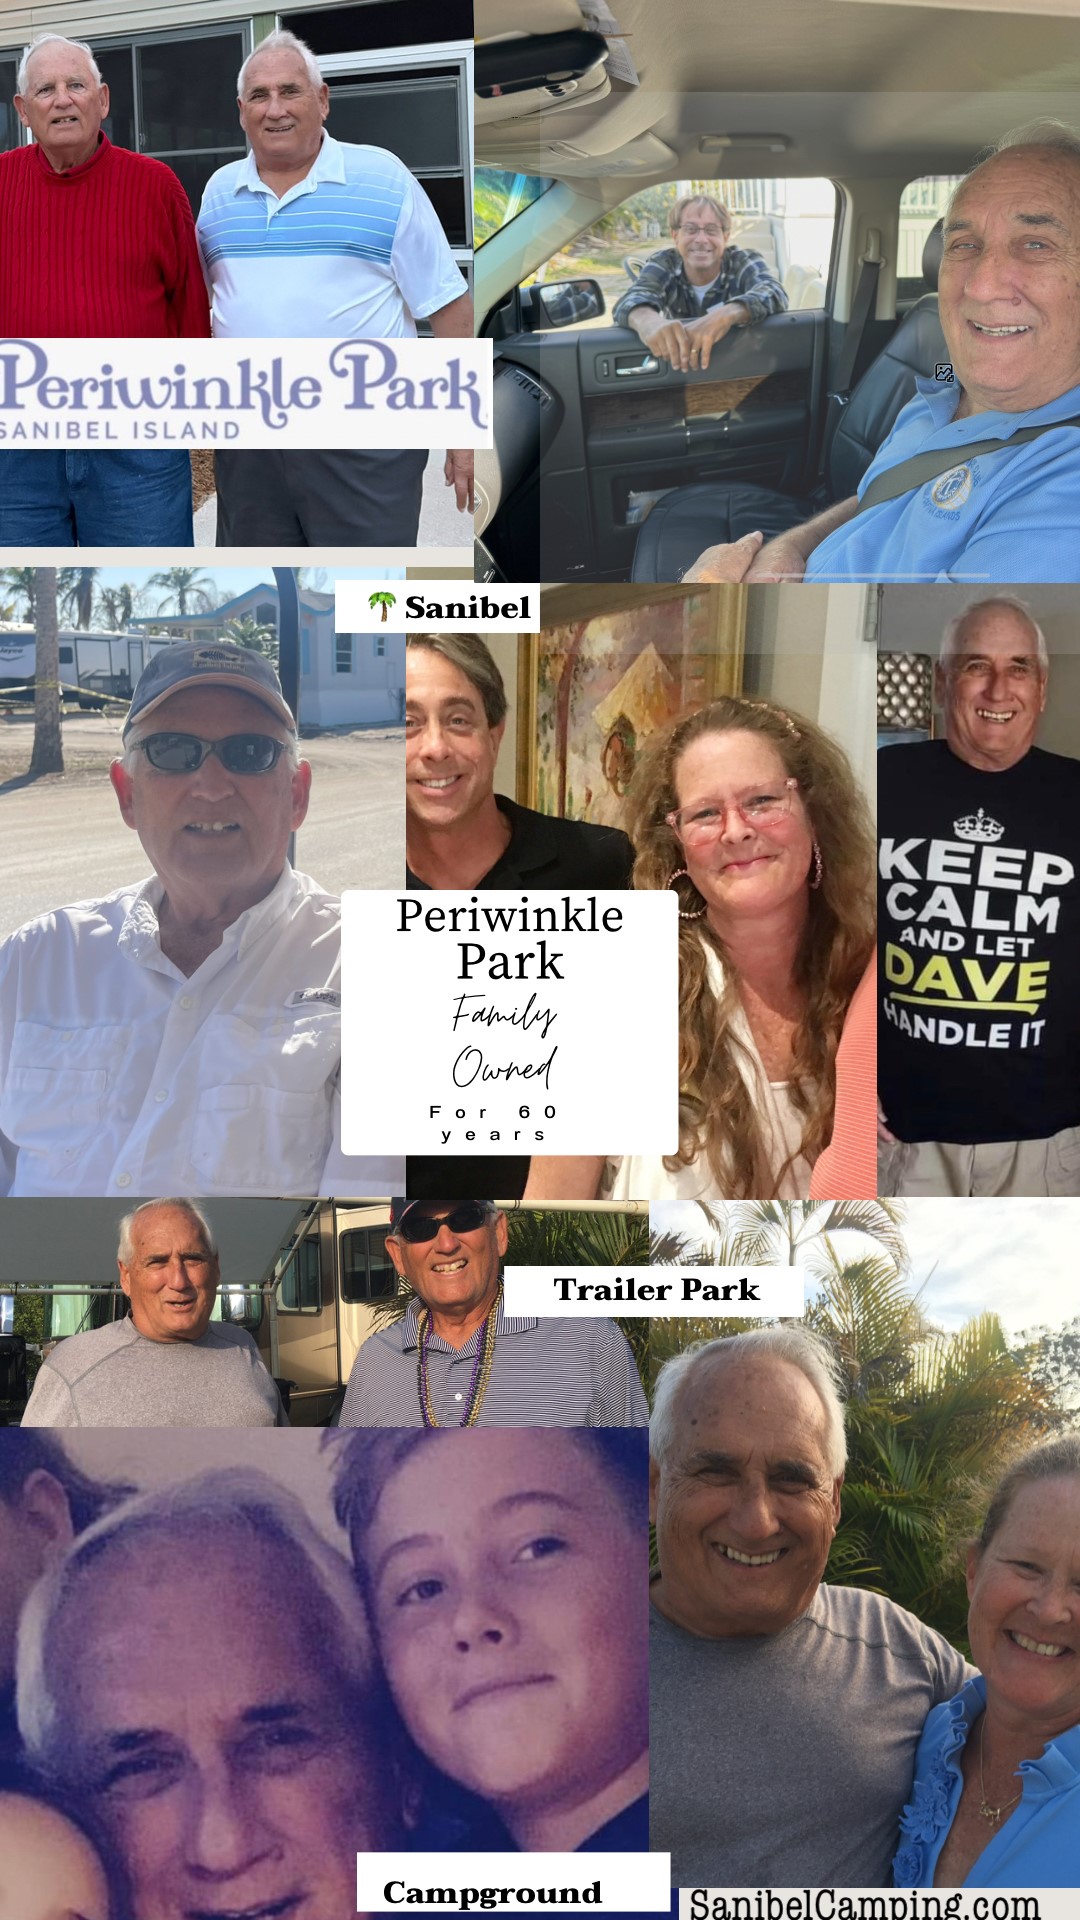 Periwinkle Park Celebrates 60 Years of Family-Owned and Operated Excellence on Sanibel Island